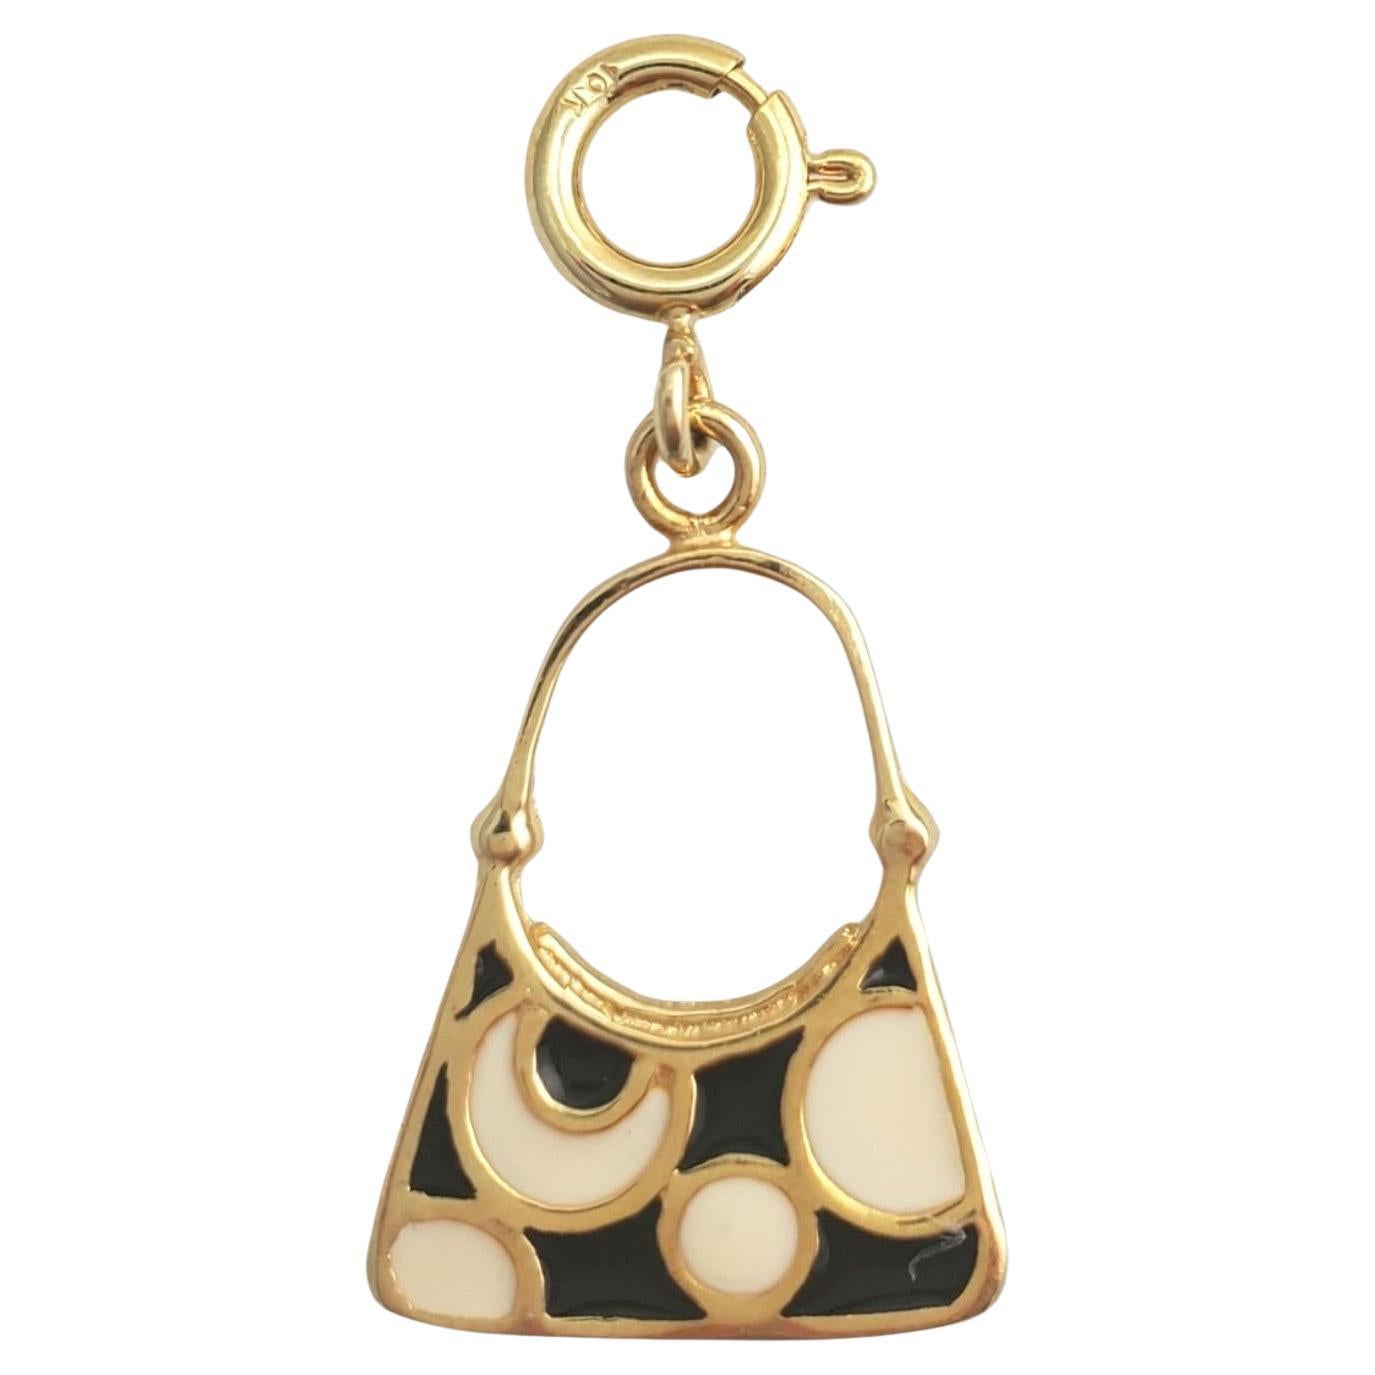 10K Yellow Gold and Enamel Purse Charm #16010